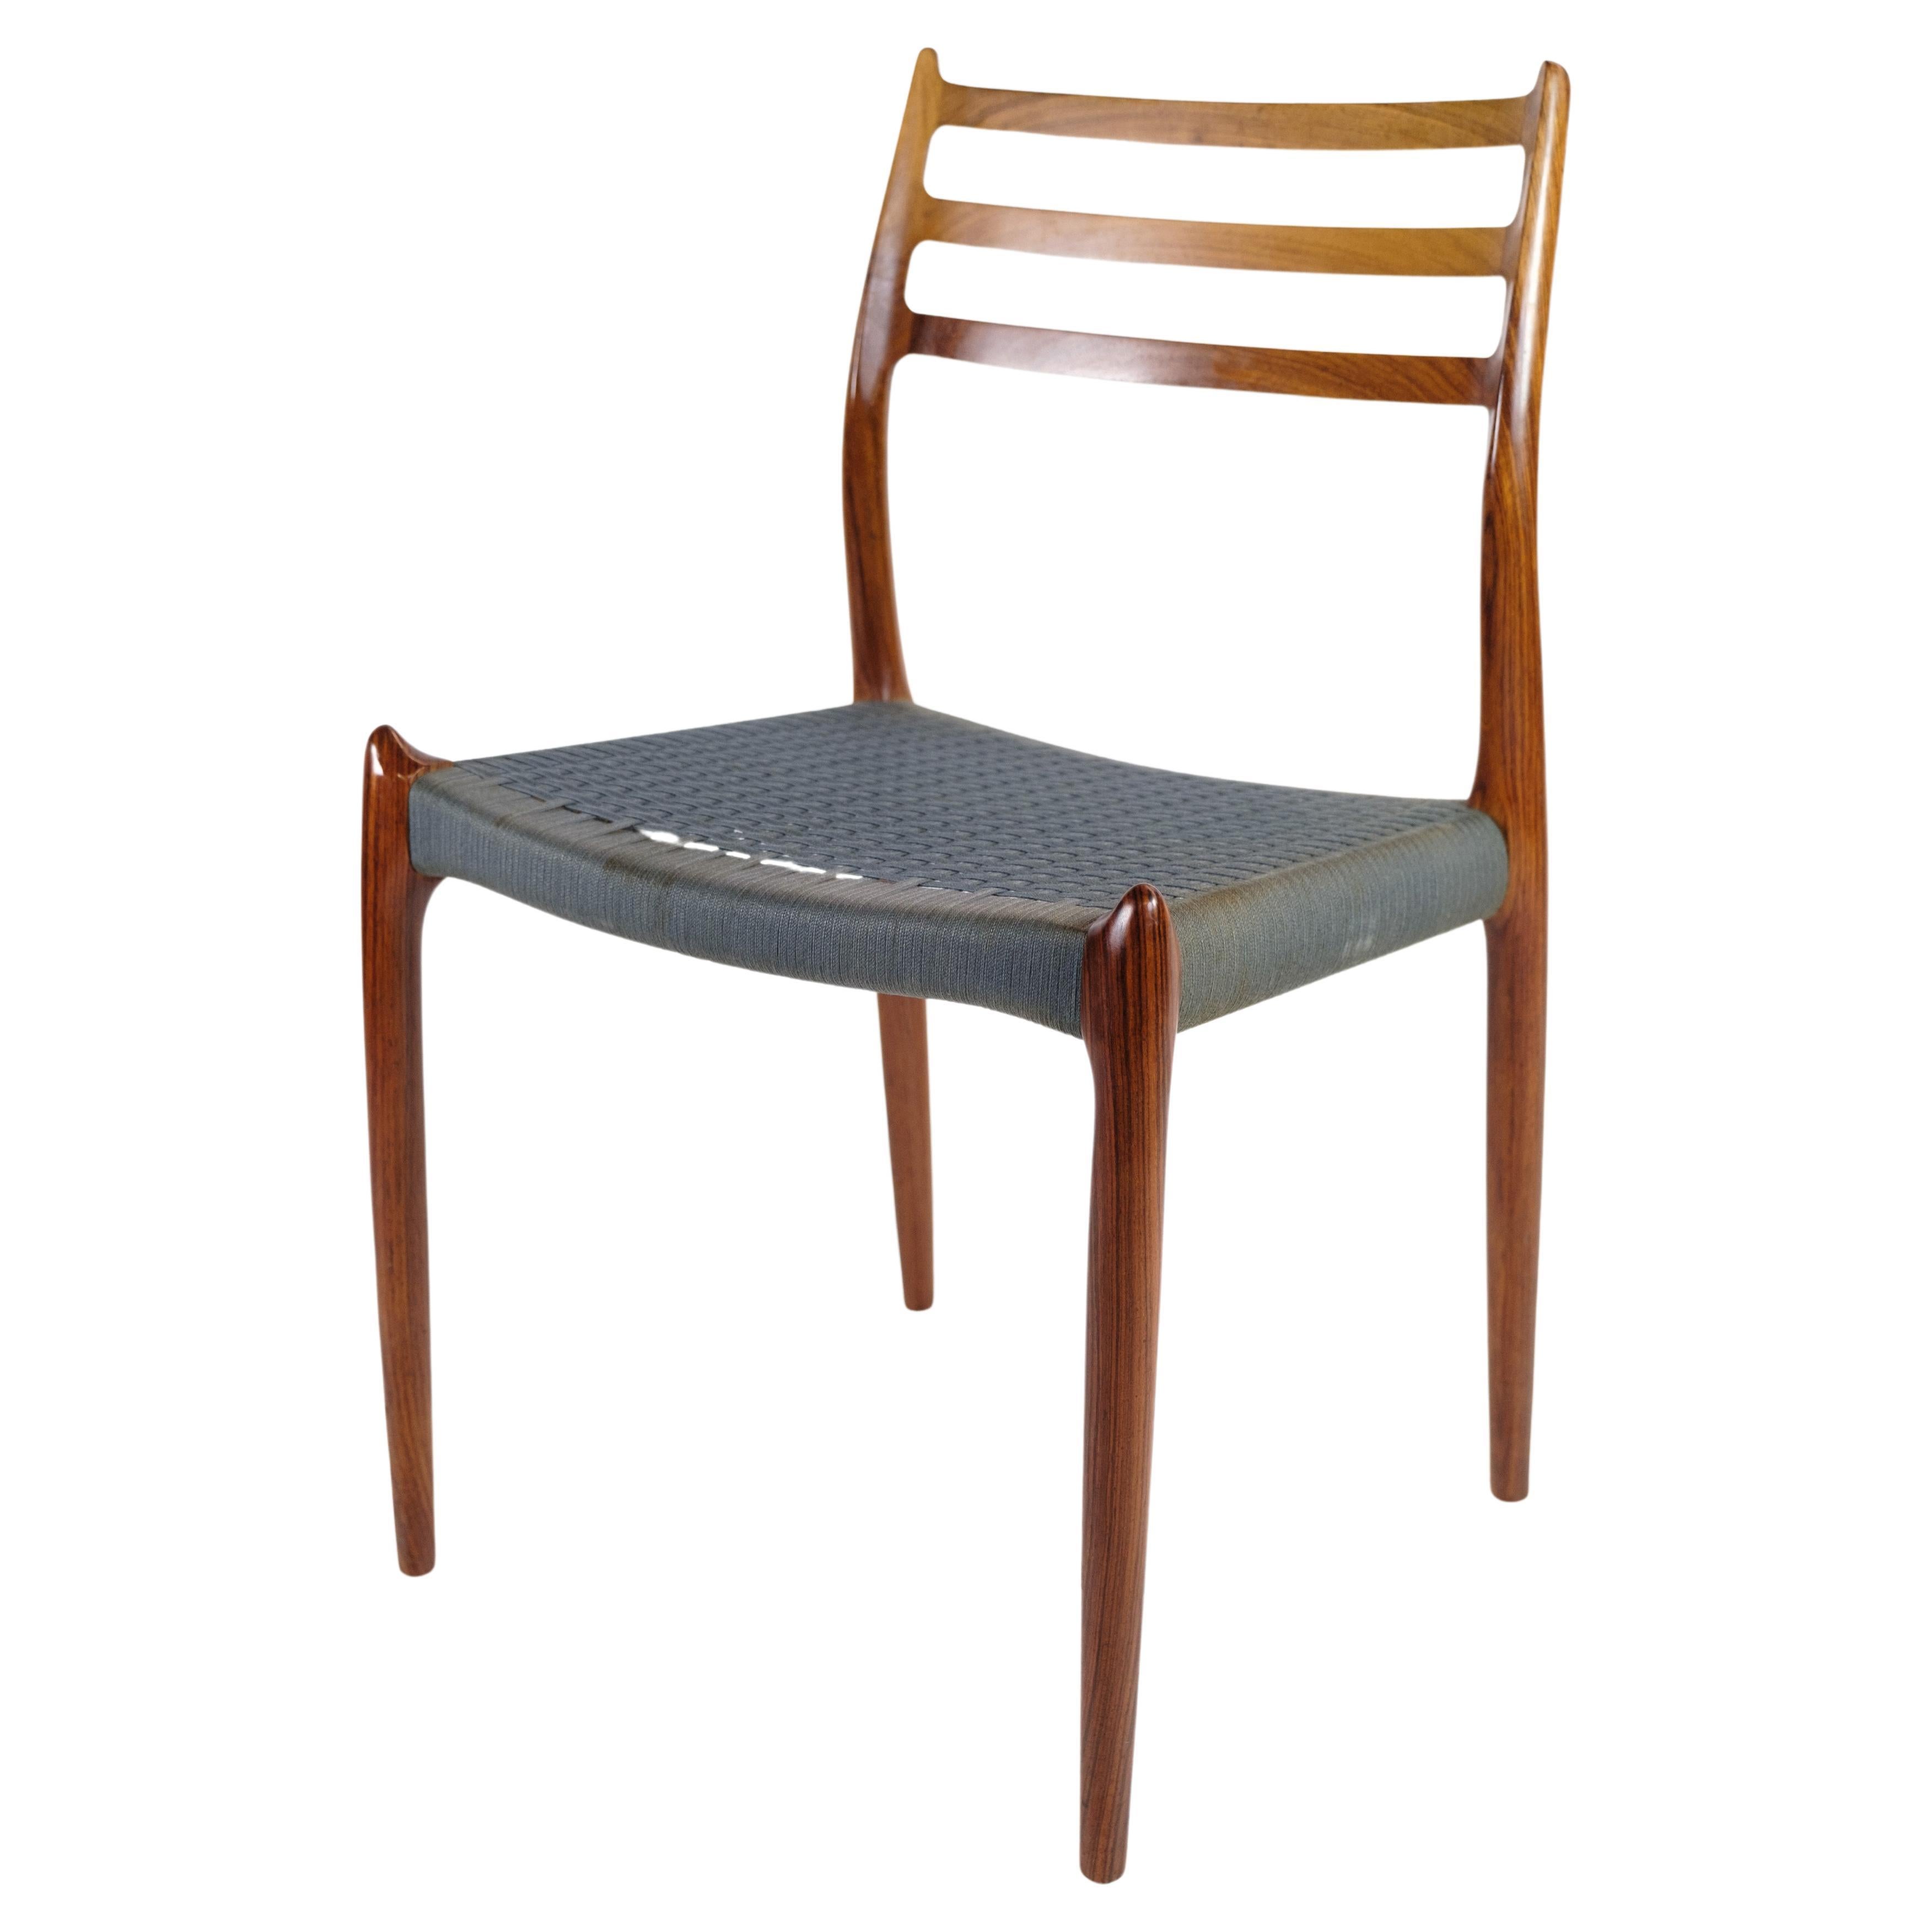 8 Dining Room Chairs Model No 78 Made In Rosewood By Niels O. Møller From 1960s For Sale